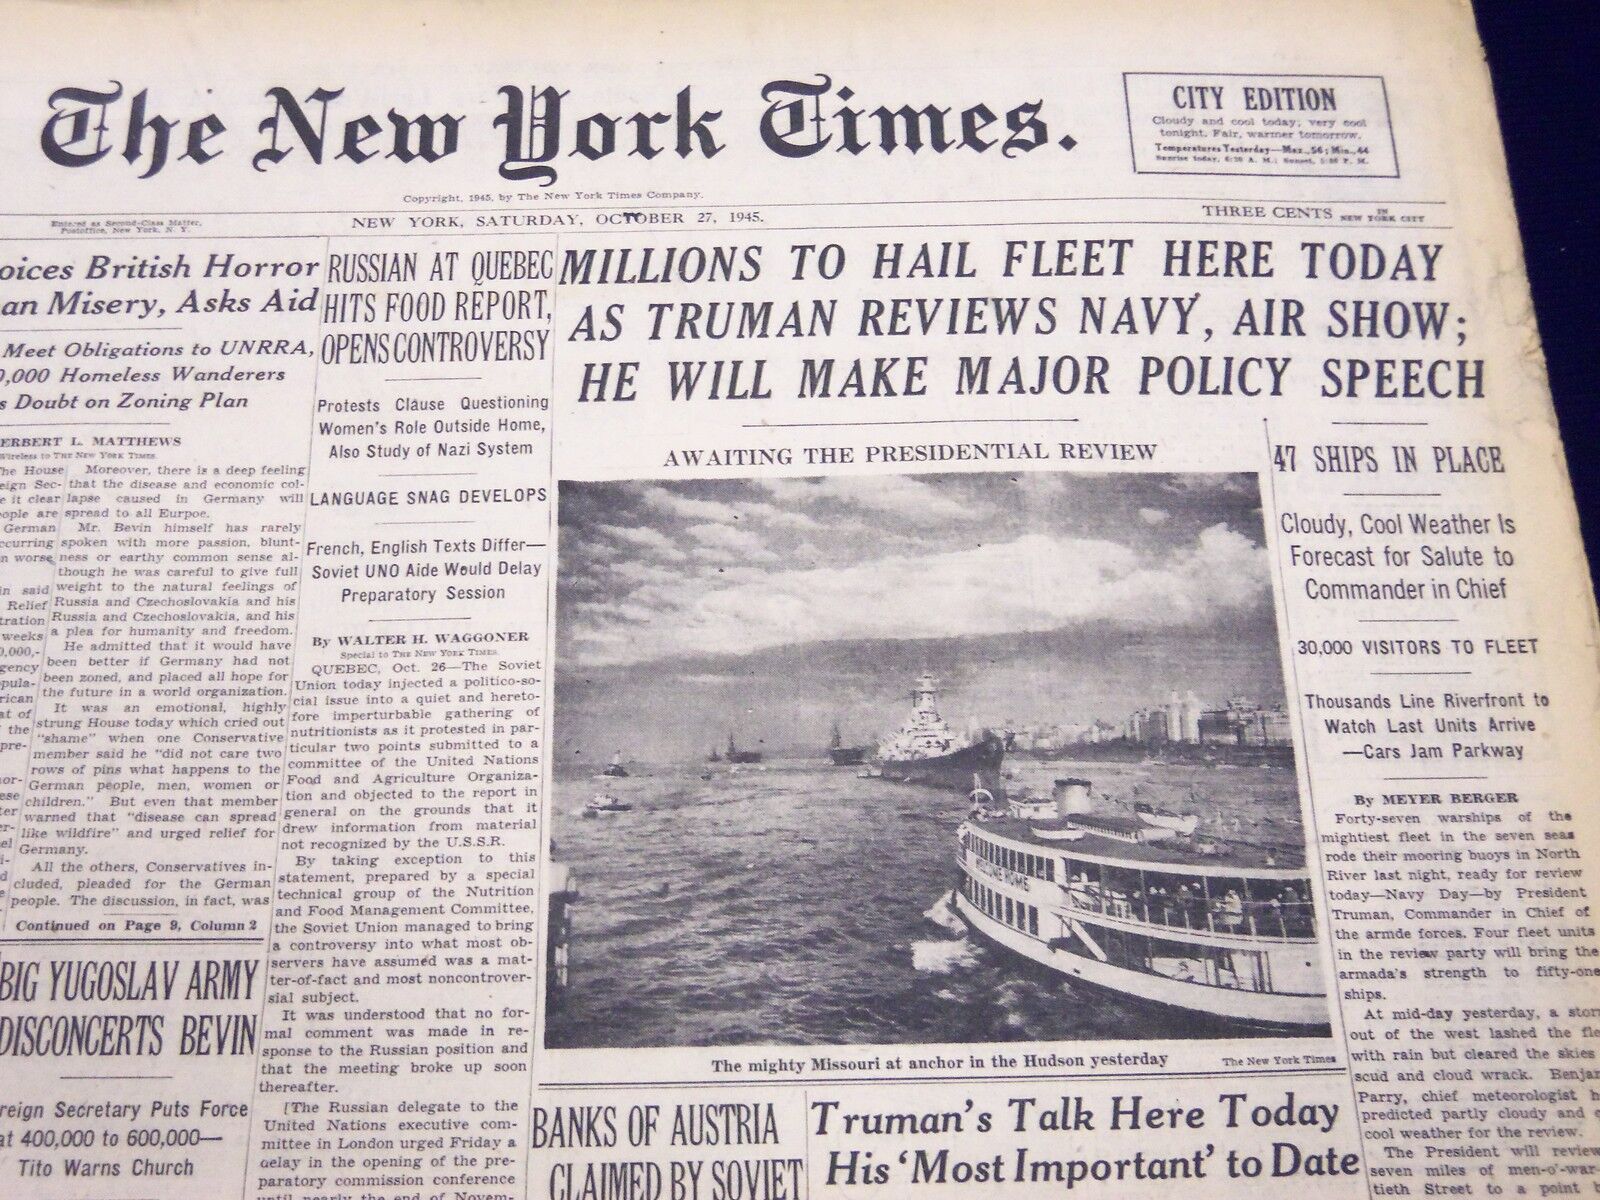 1945 OCT 27 NEW YORK TIMES - MILLIONS TO HAIL FLEET HERE TODAY - NT 246